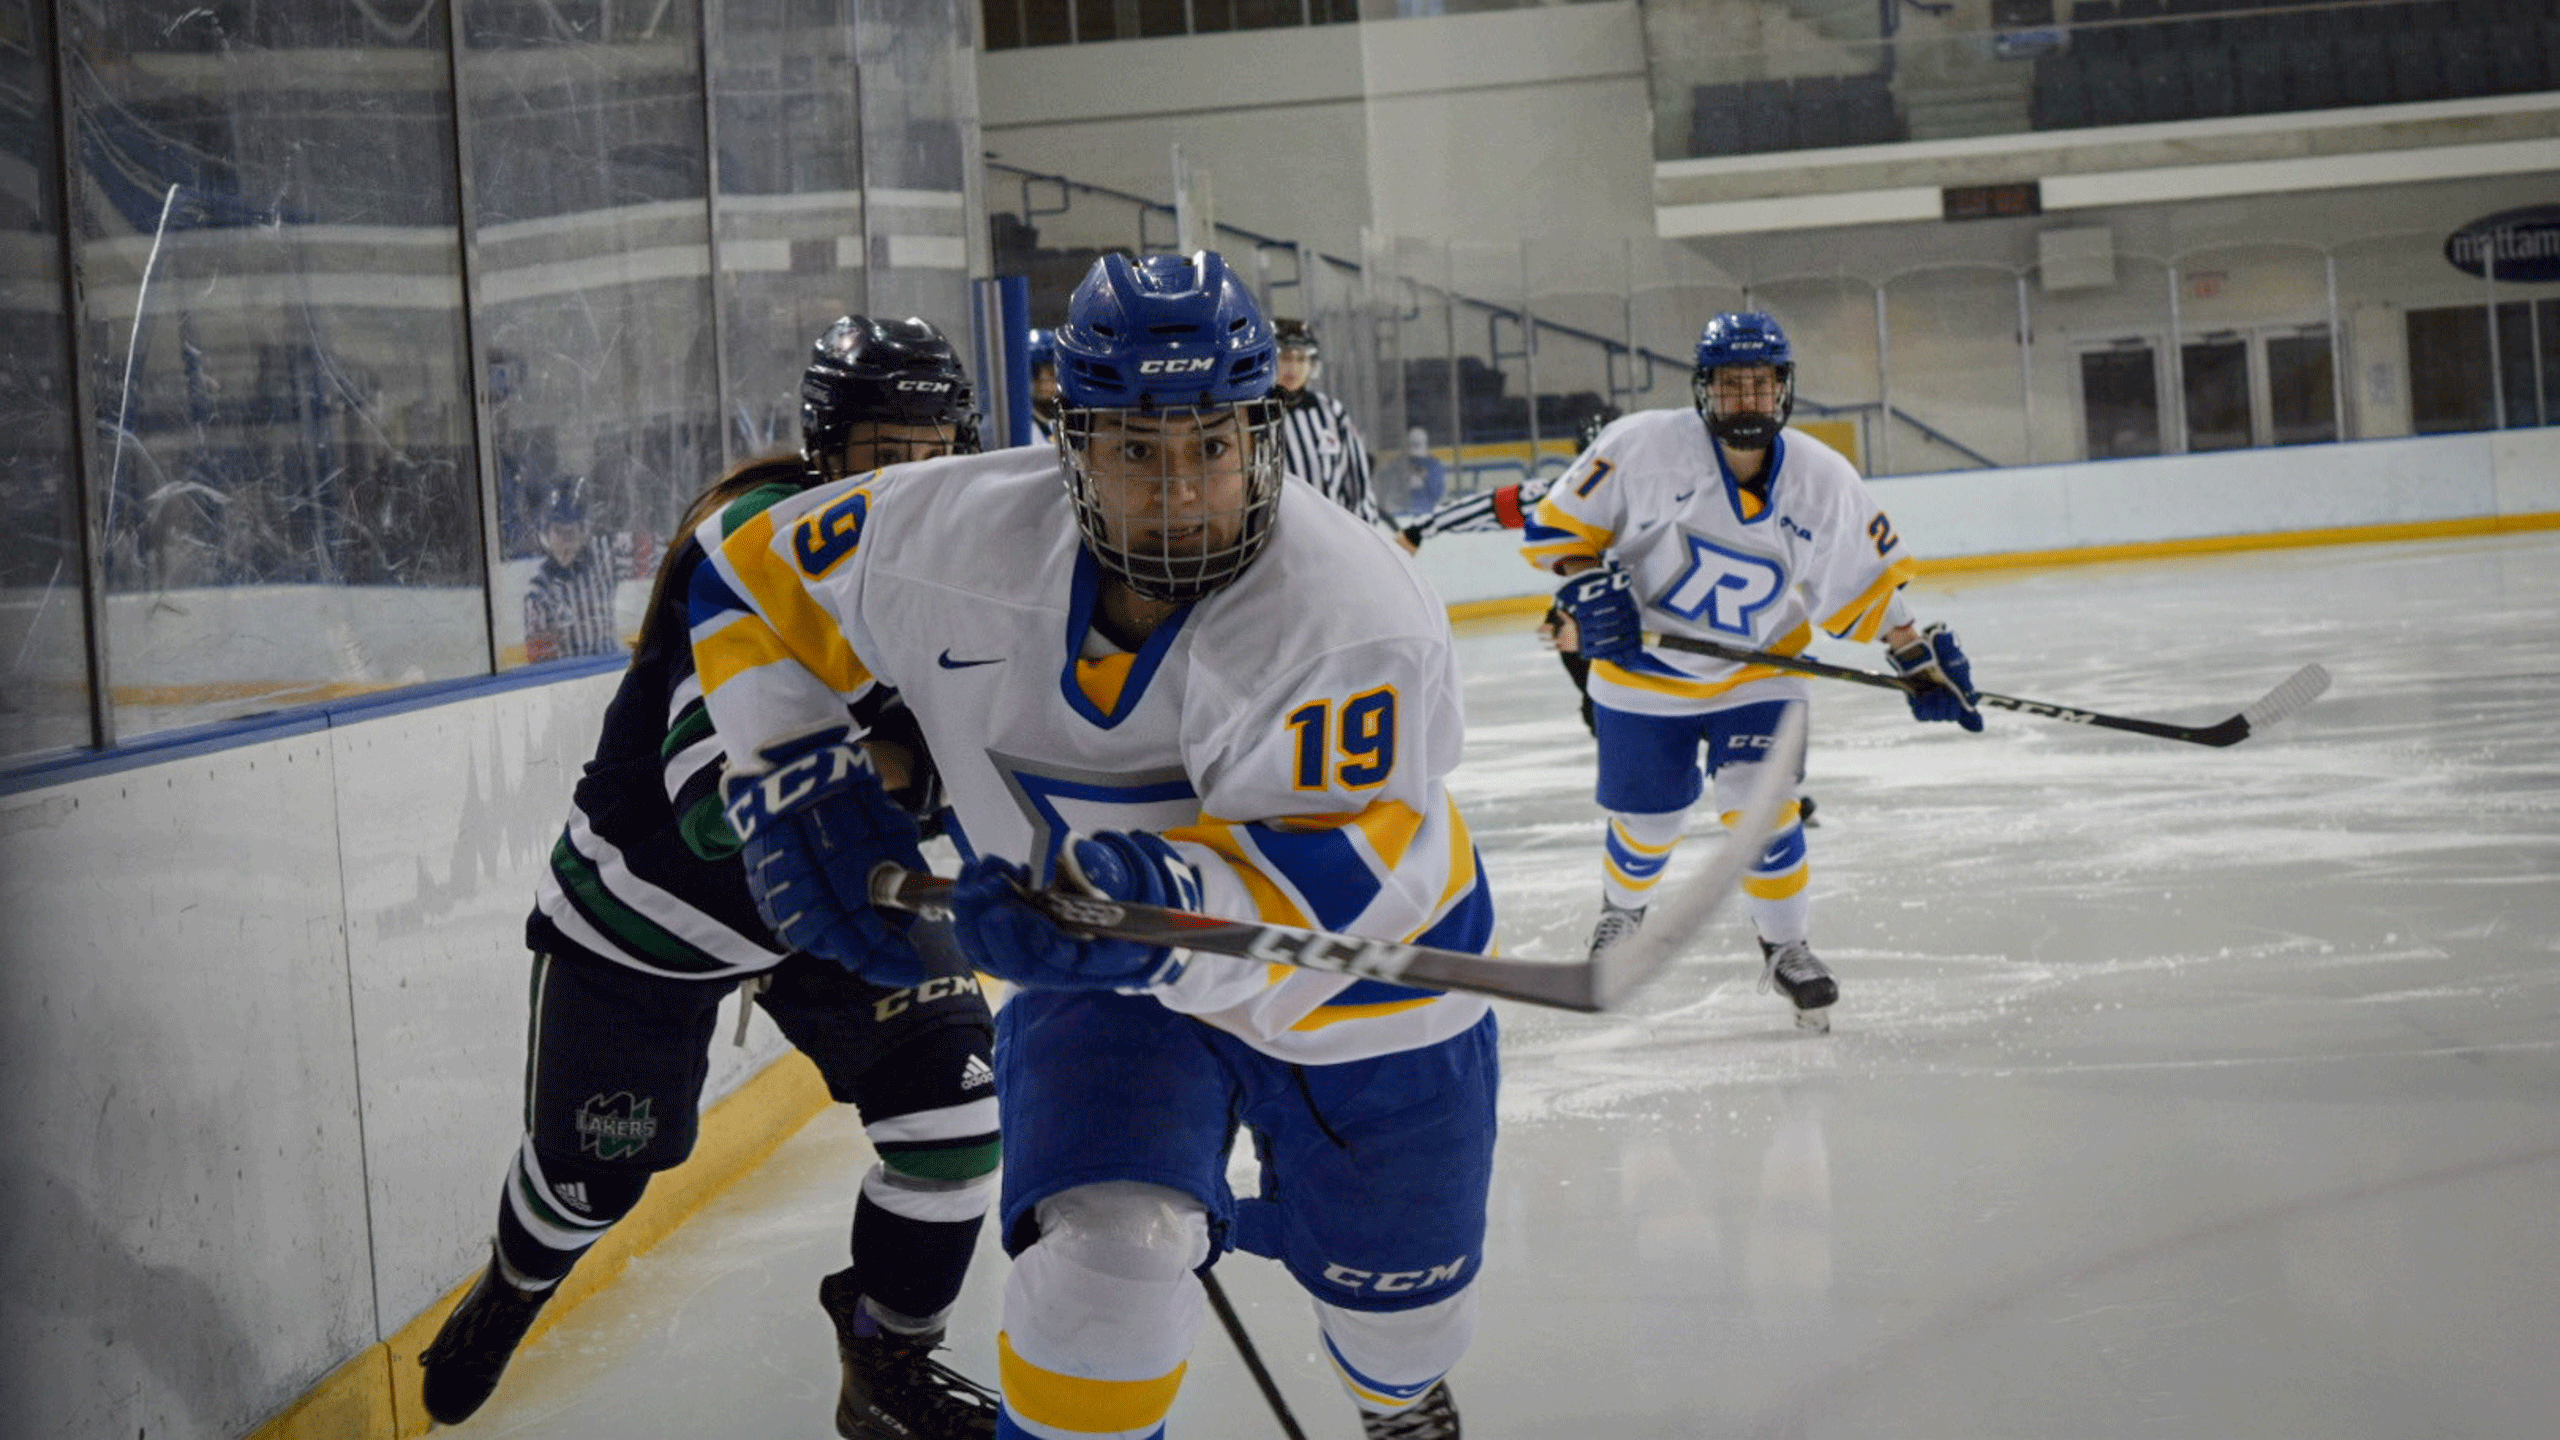 A Rams women's hockey player in a white jersey chases the puck